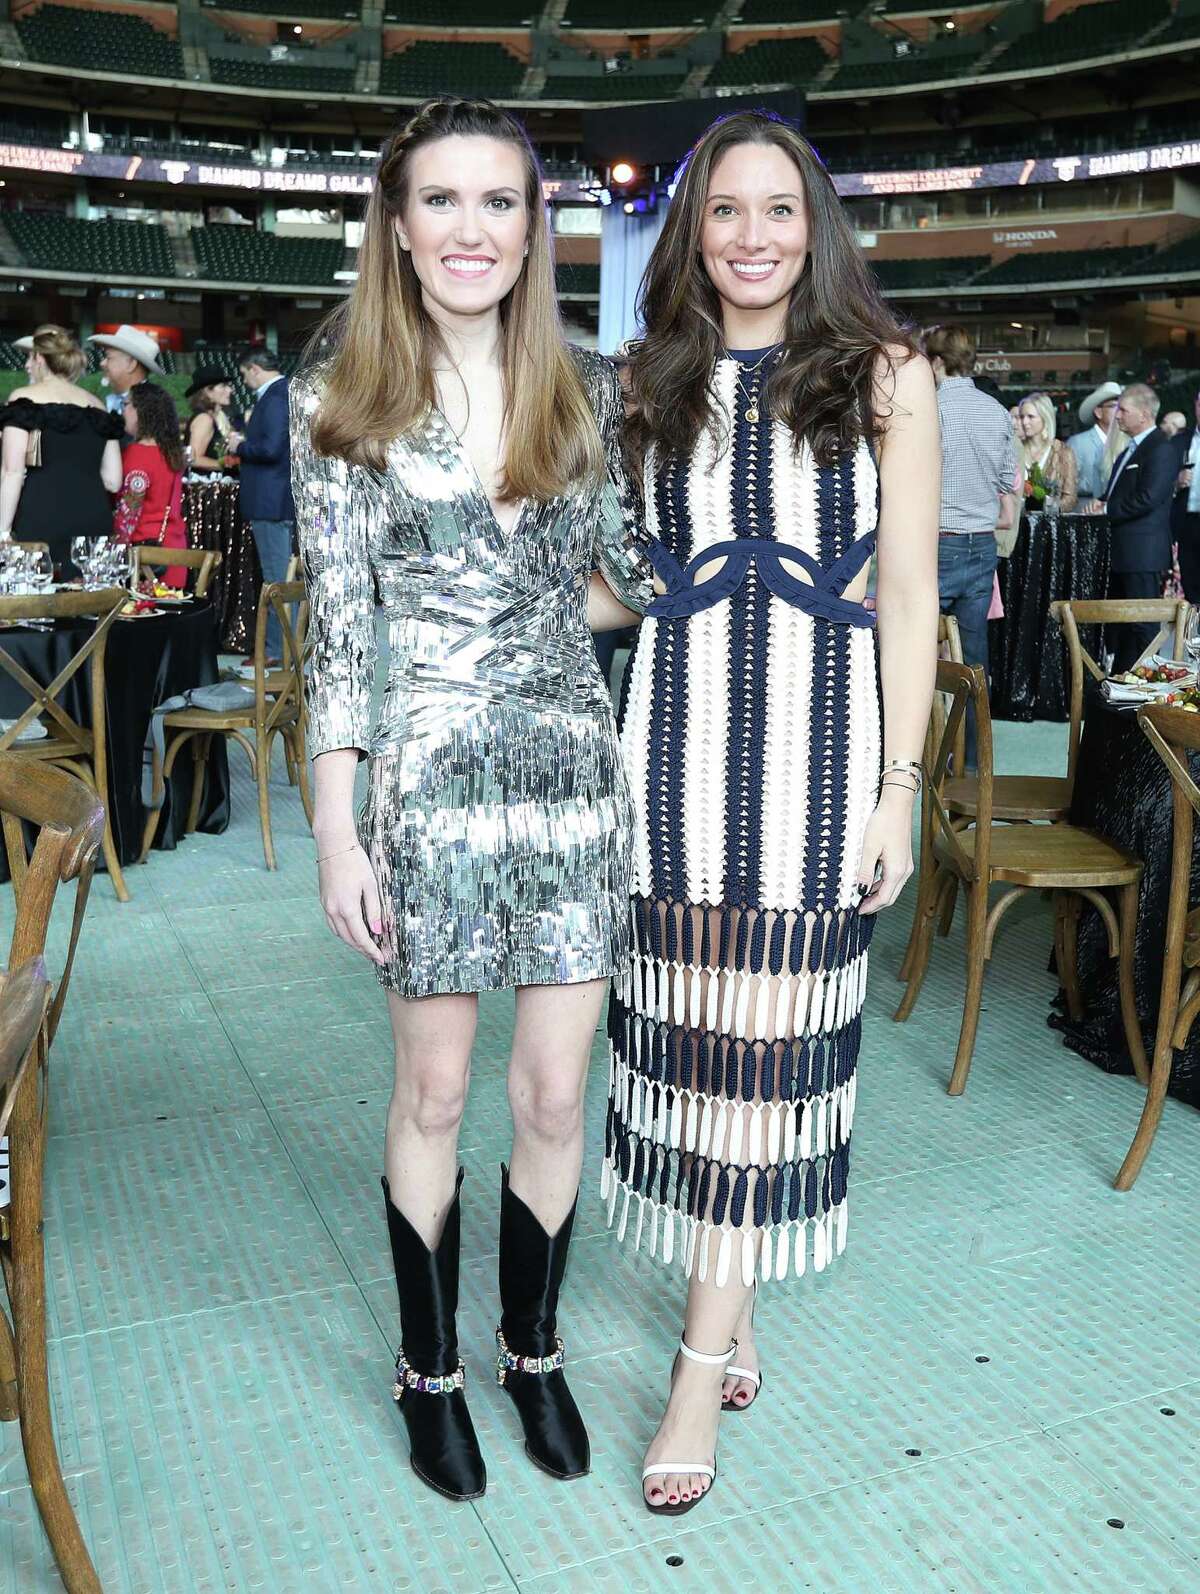 Heather Almond, left, and Kylie Bumgardner, right during the Astros Foundation’s sixth annual Diamond Dreams Gala presented by Chevron, featuring singer-songwriter and Texas native Lyle Lovett and his Large Band on the field at Minute Maid Park, Thursday, September 9, 2021, in Houston.